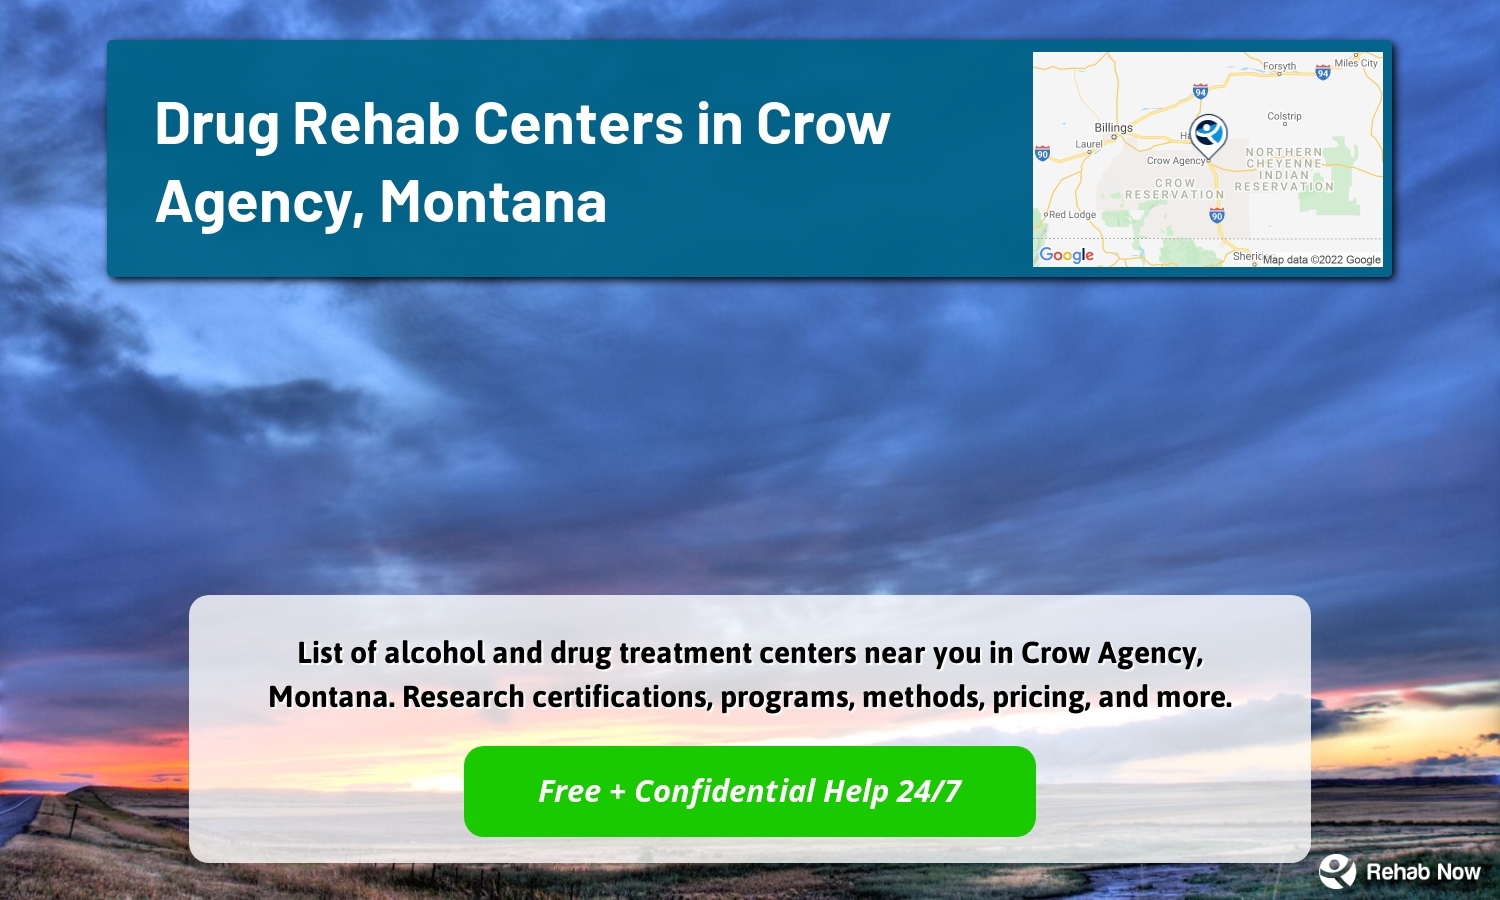 List of alcohol and drug treatment centers near you in Crow Agency, Montana. Research certifications, programs, methods, pricing, and more.